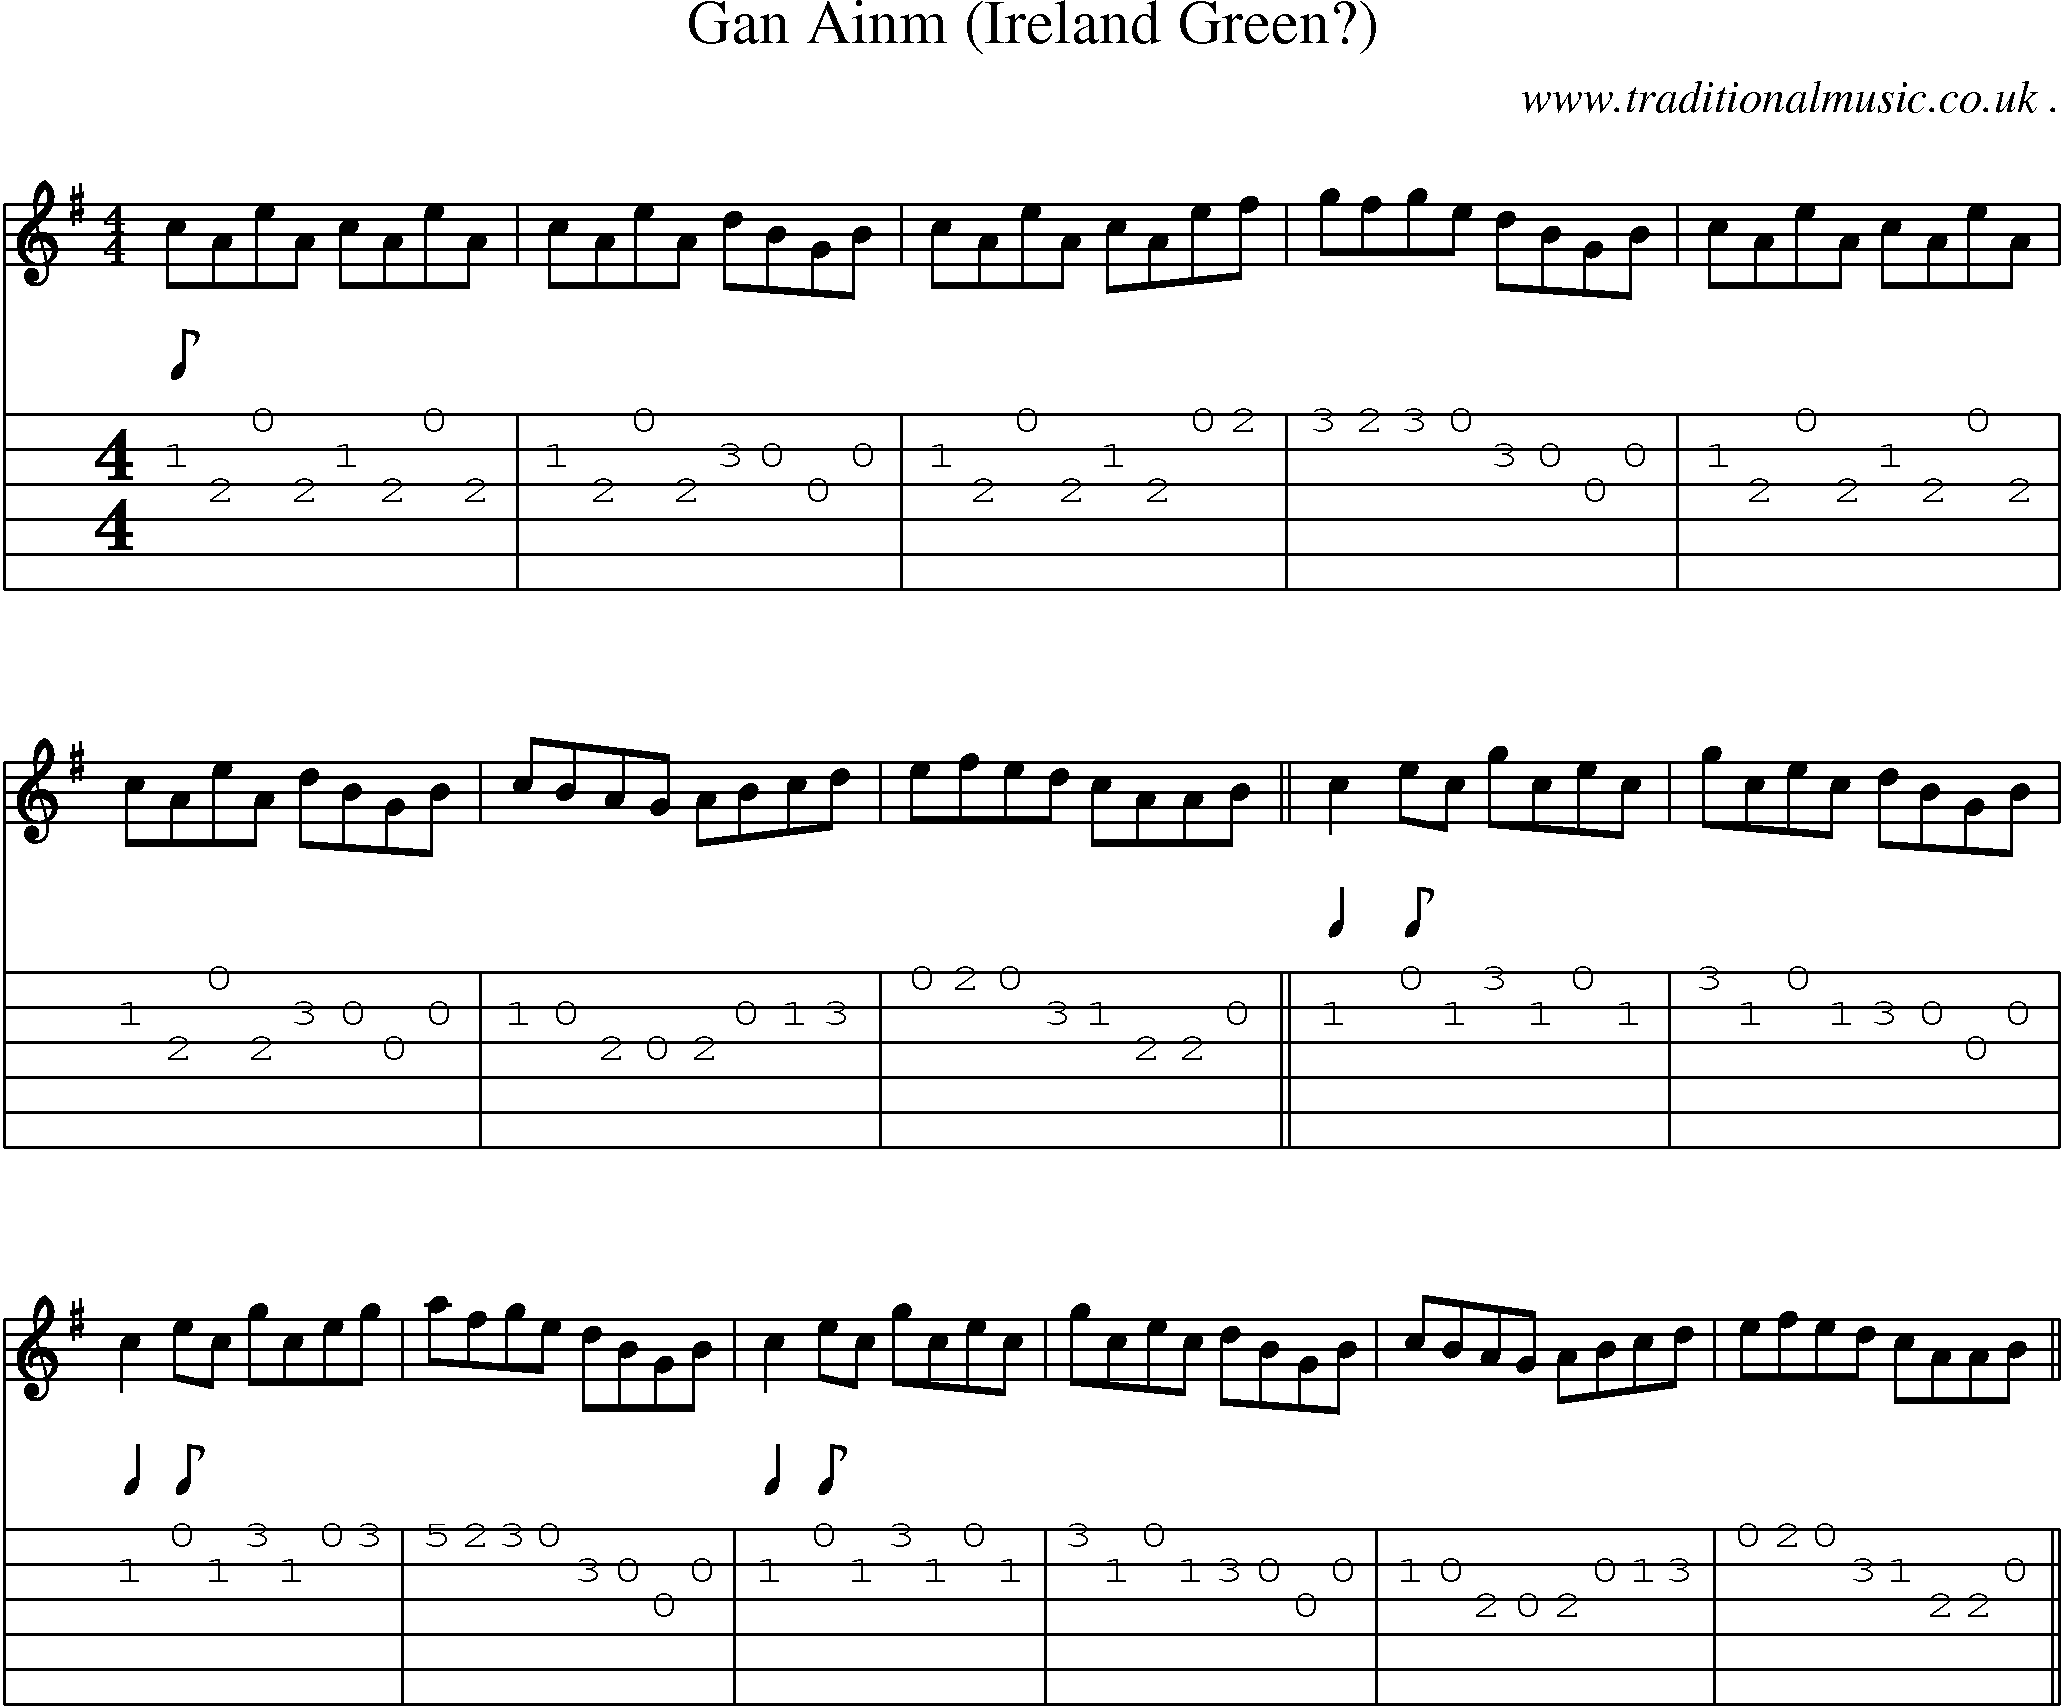 Sheet-Music and Guitar Tabs for Gan Ainm (ireland Green)